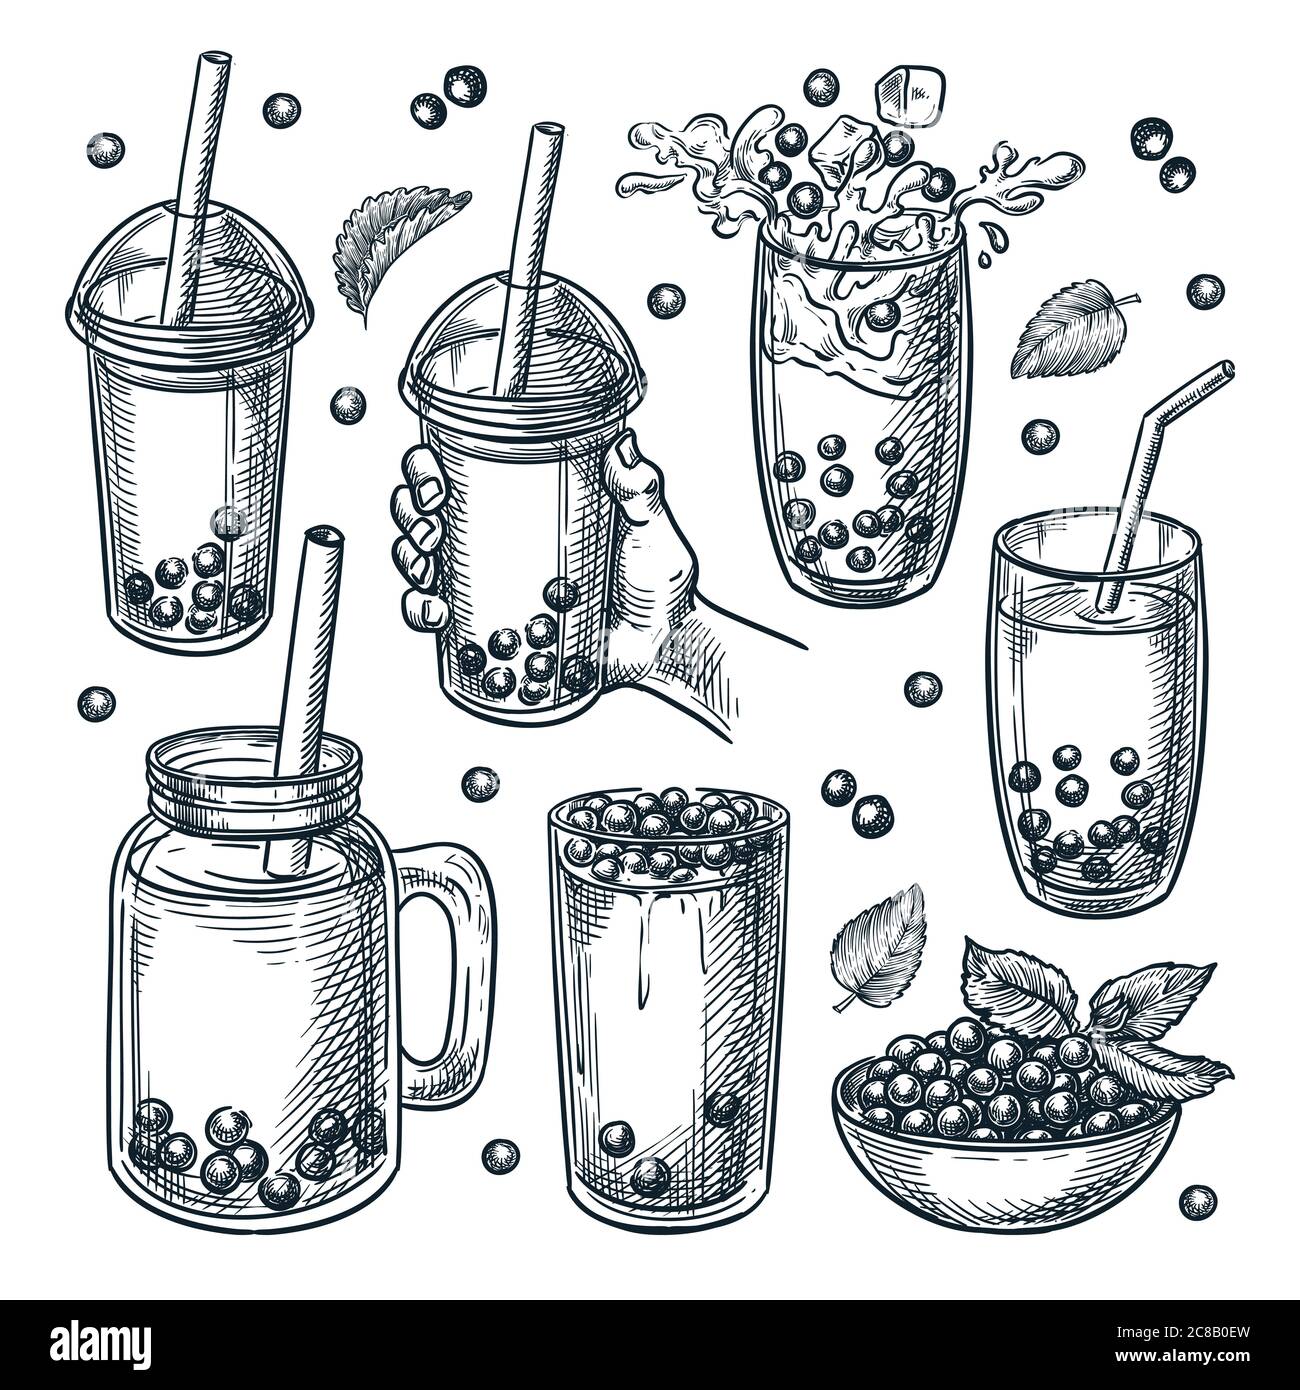 Taiwan Bubble Tea Vector High Resolution Stock Photography And Images Alamy